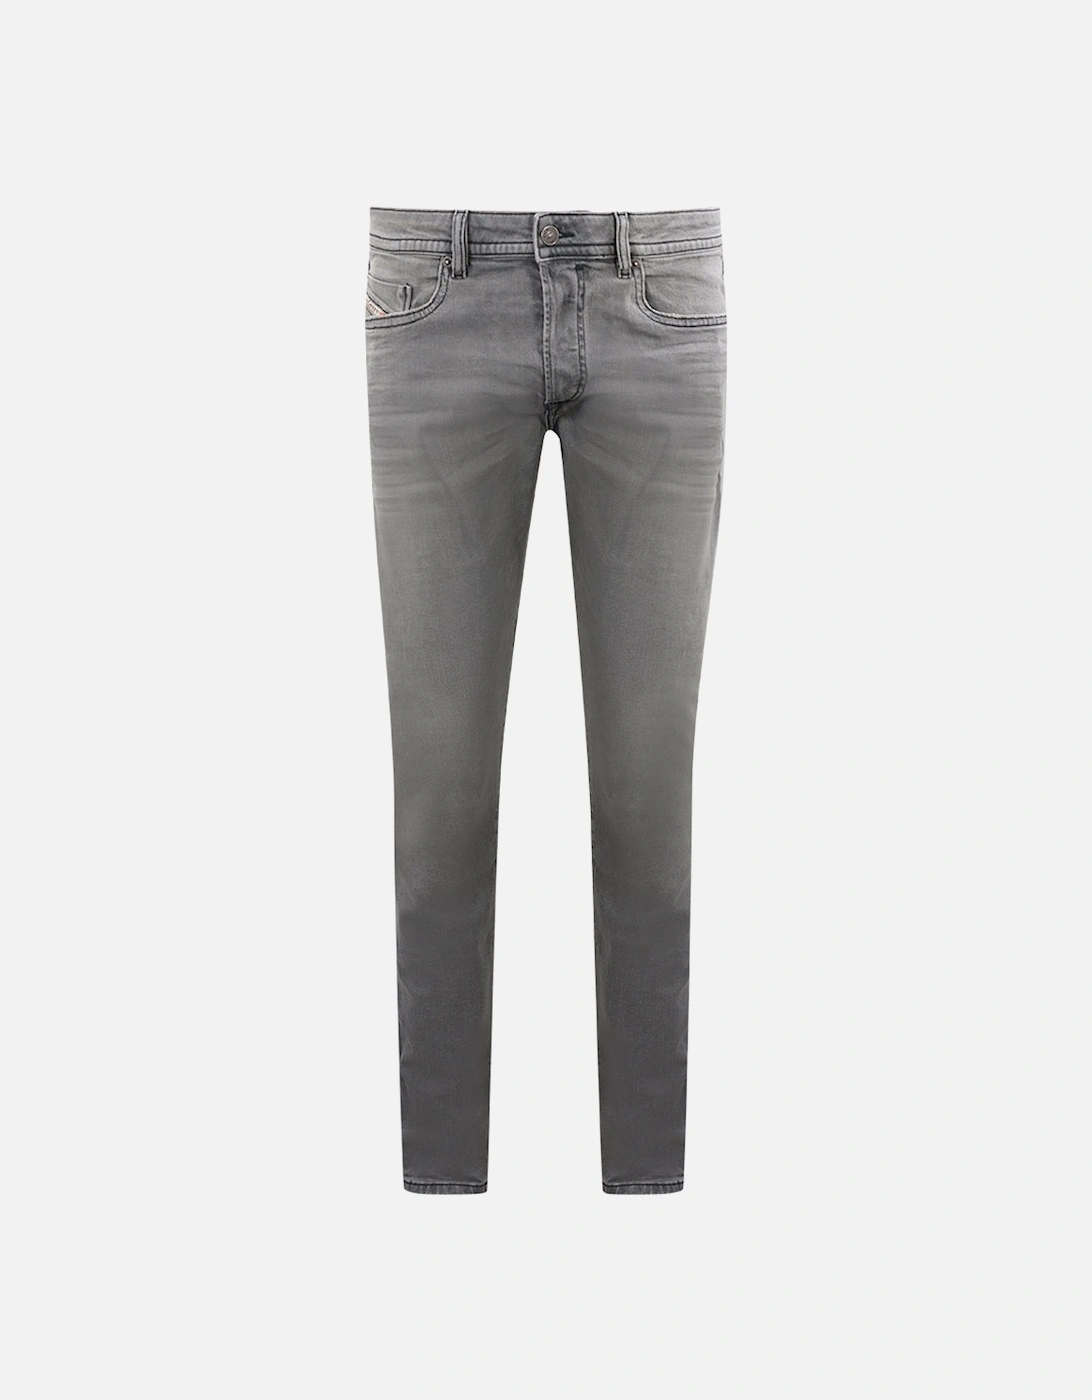 Buster-X RM041 Grey Jeans, 3 of 2